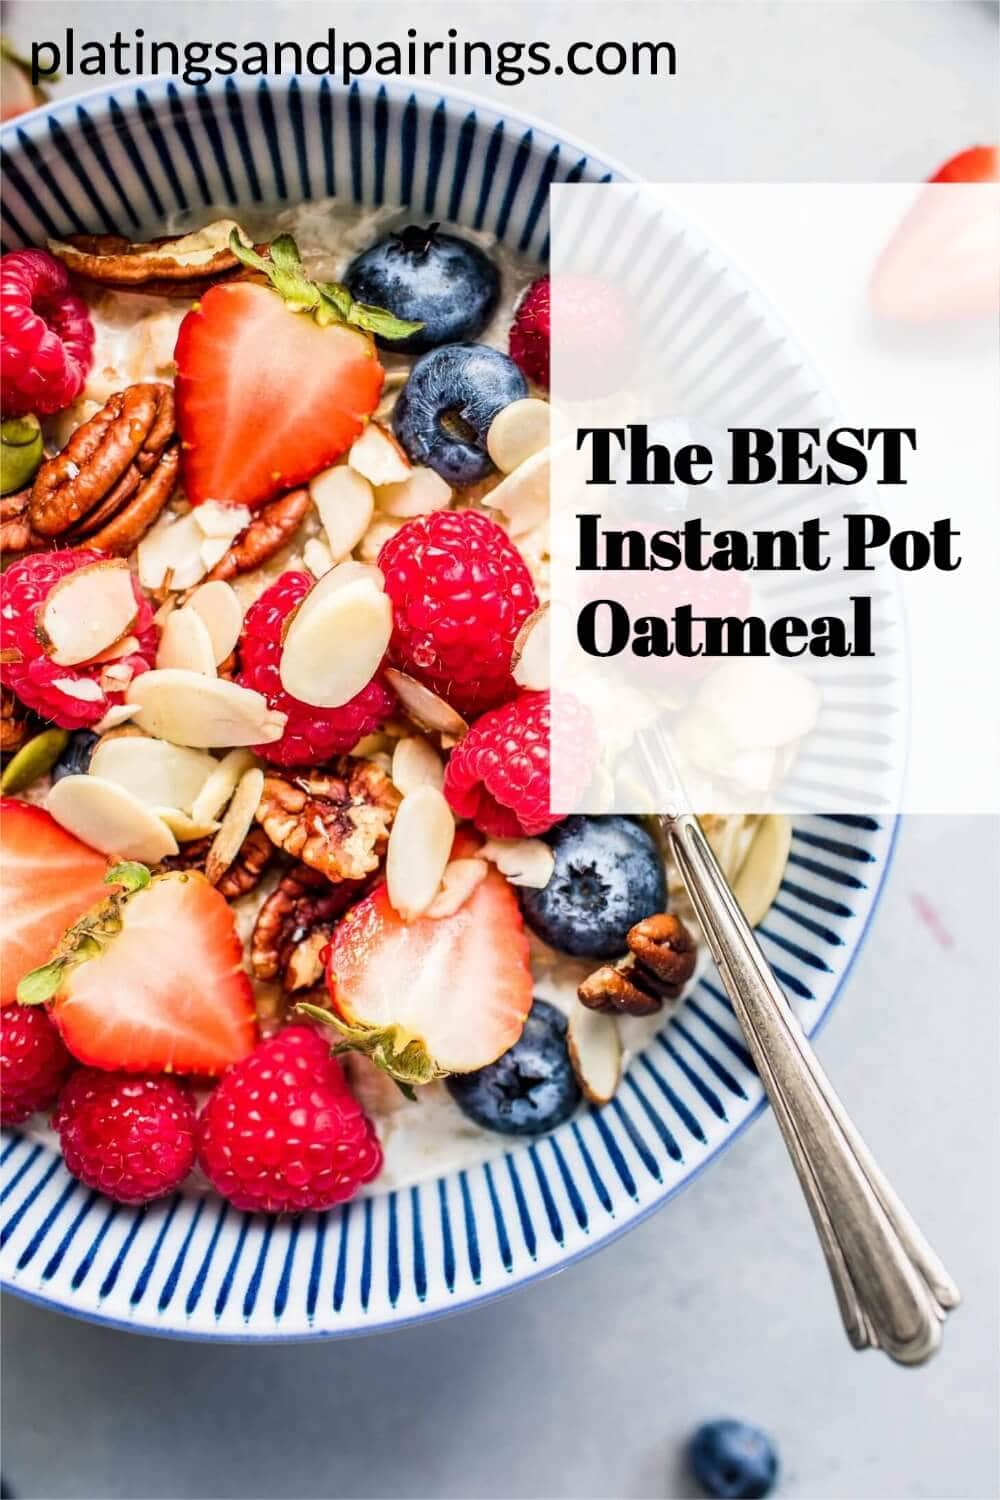 The BEST Instant Pot Oatmeal